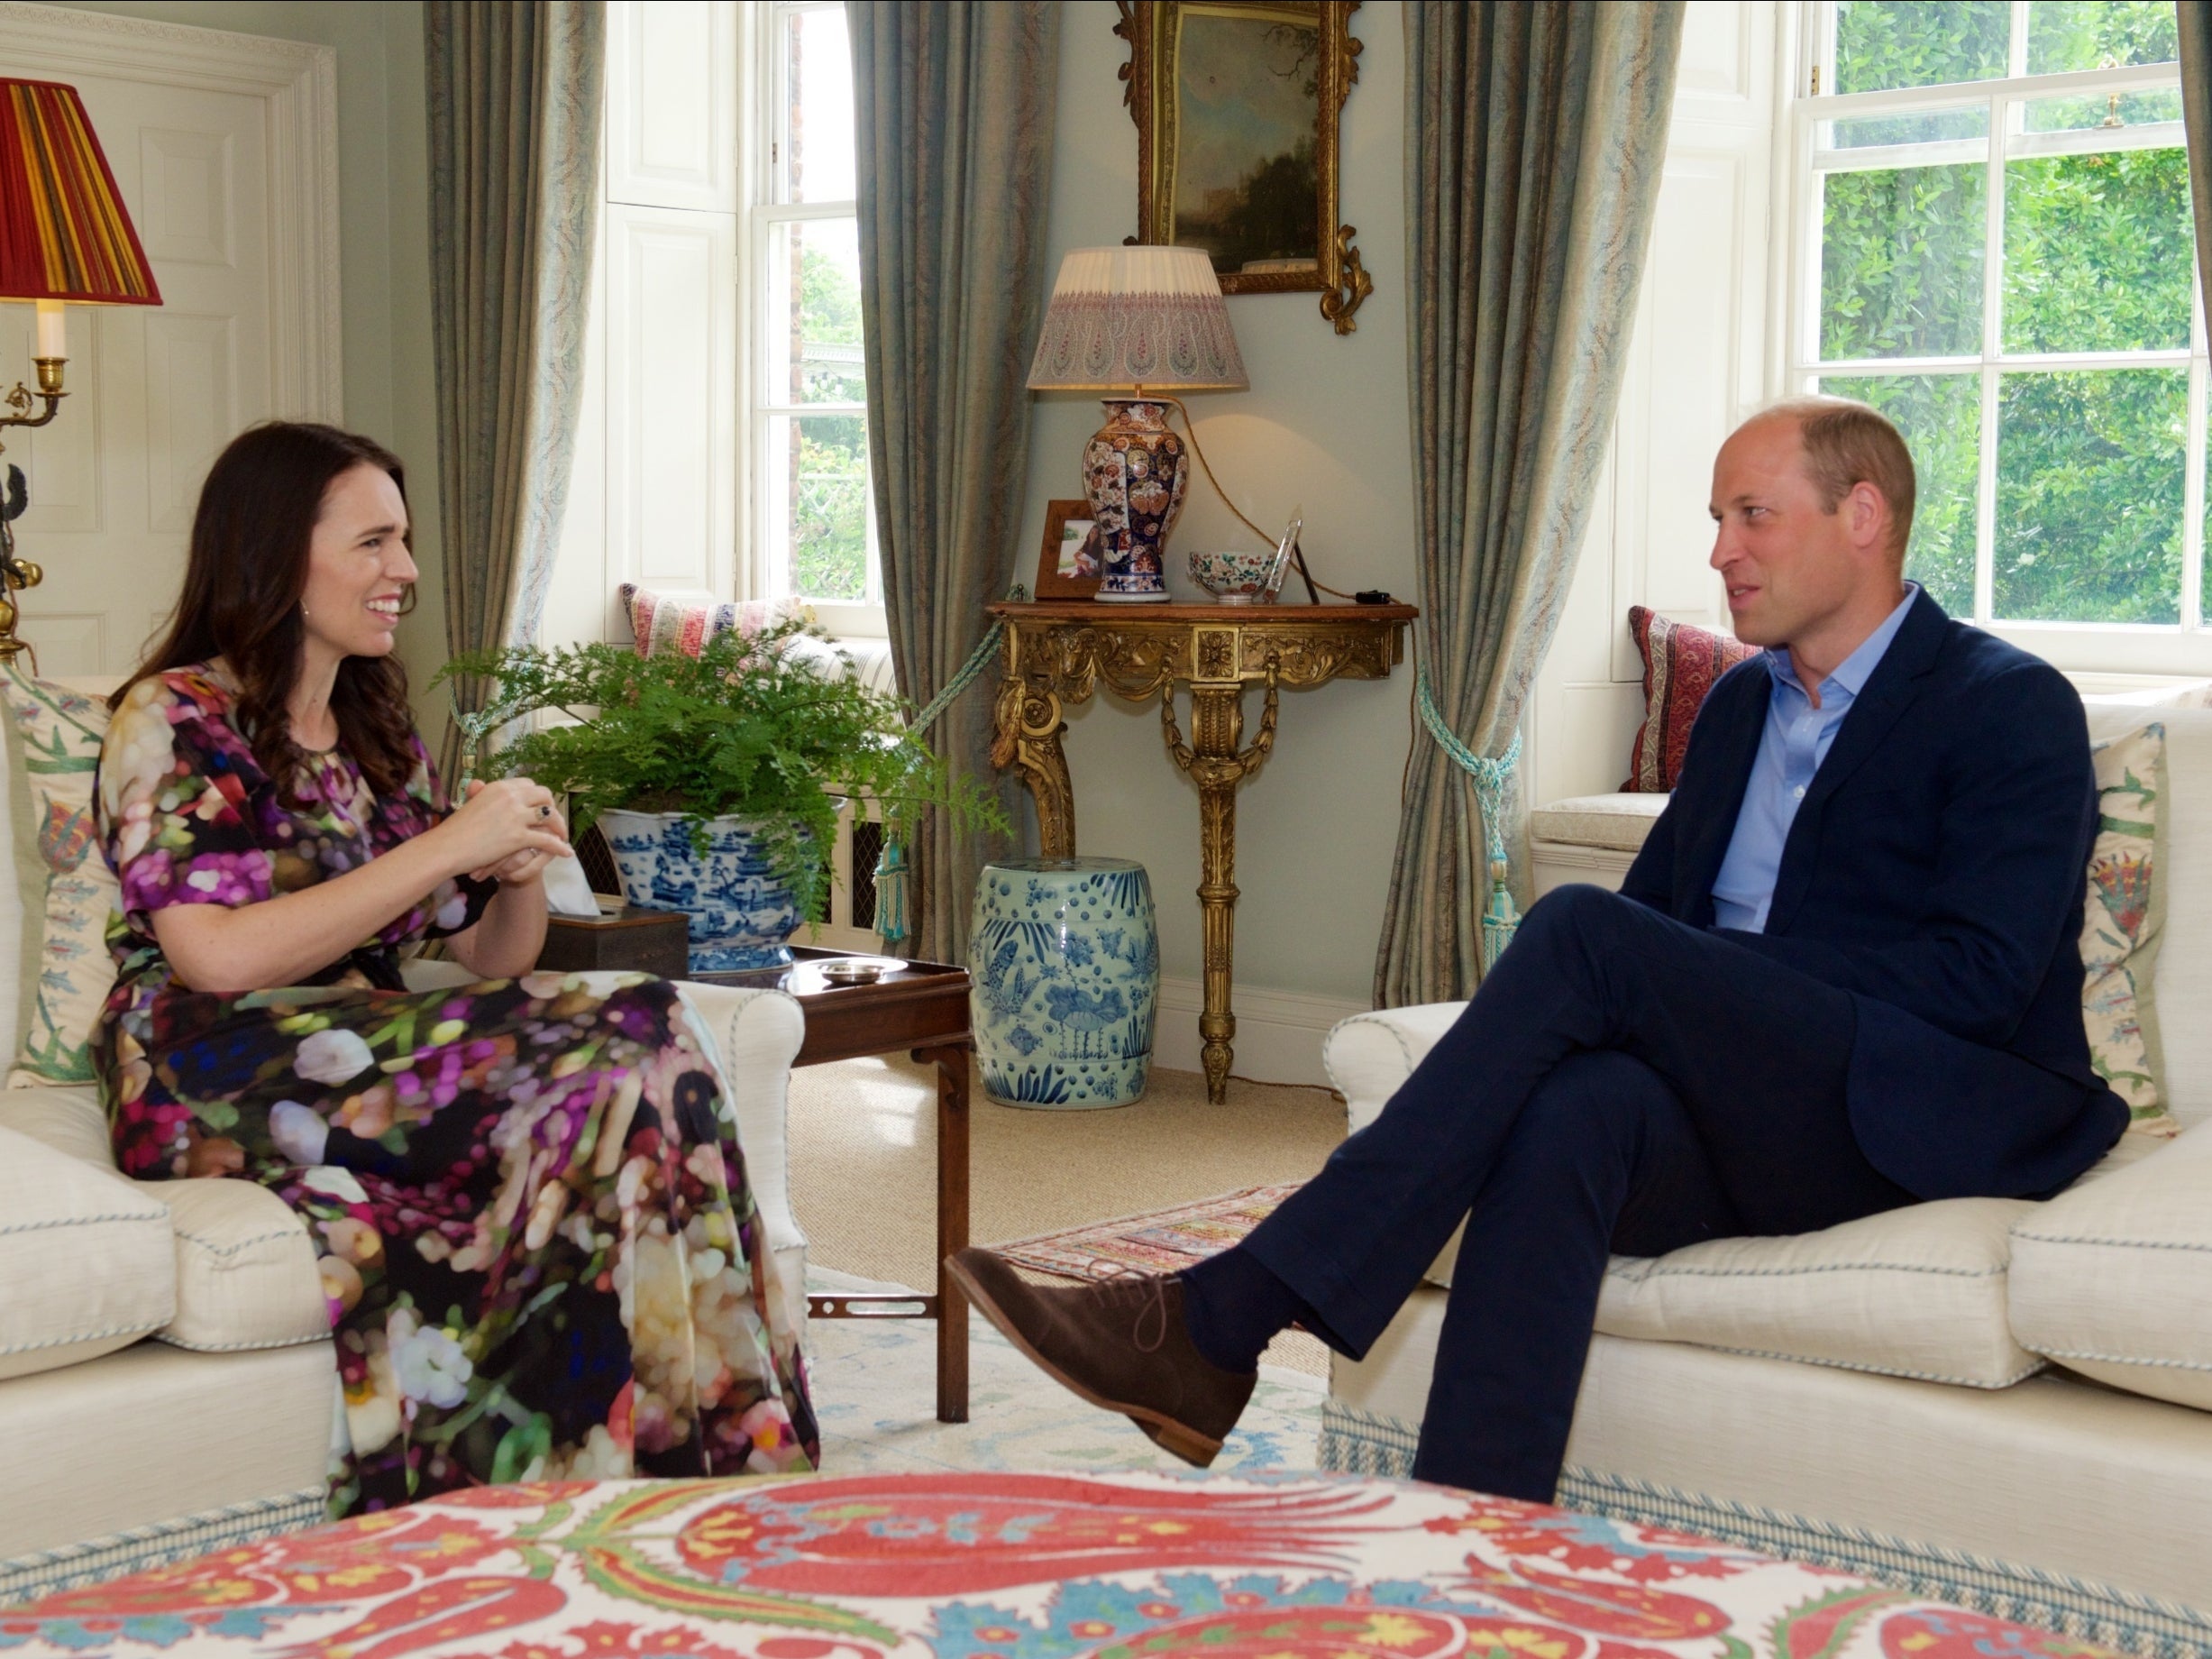 Handout photo issued by Kensington Palace of the Duke of Cambridge meeting New Zealand Prime Minister Jacinda Ardern at Kensington Palace